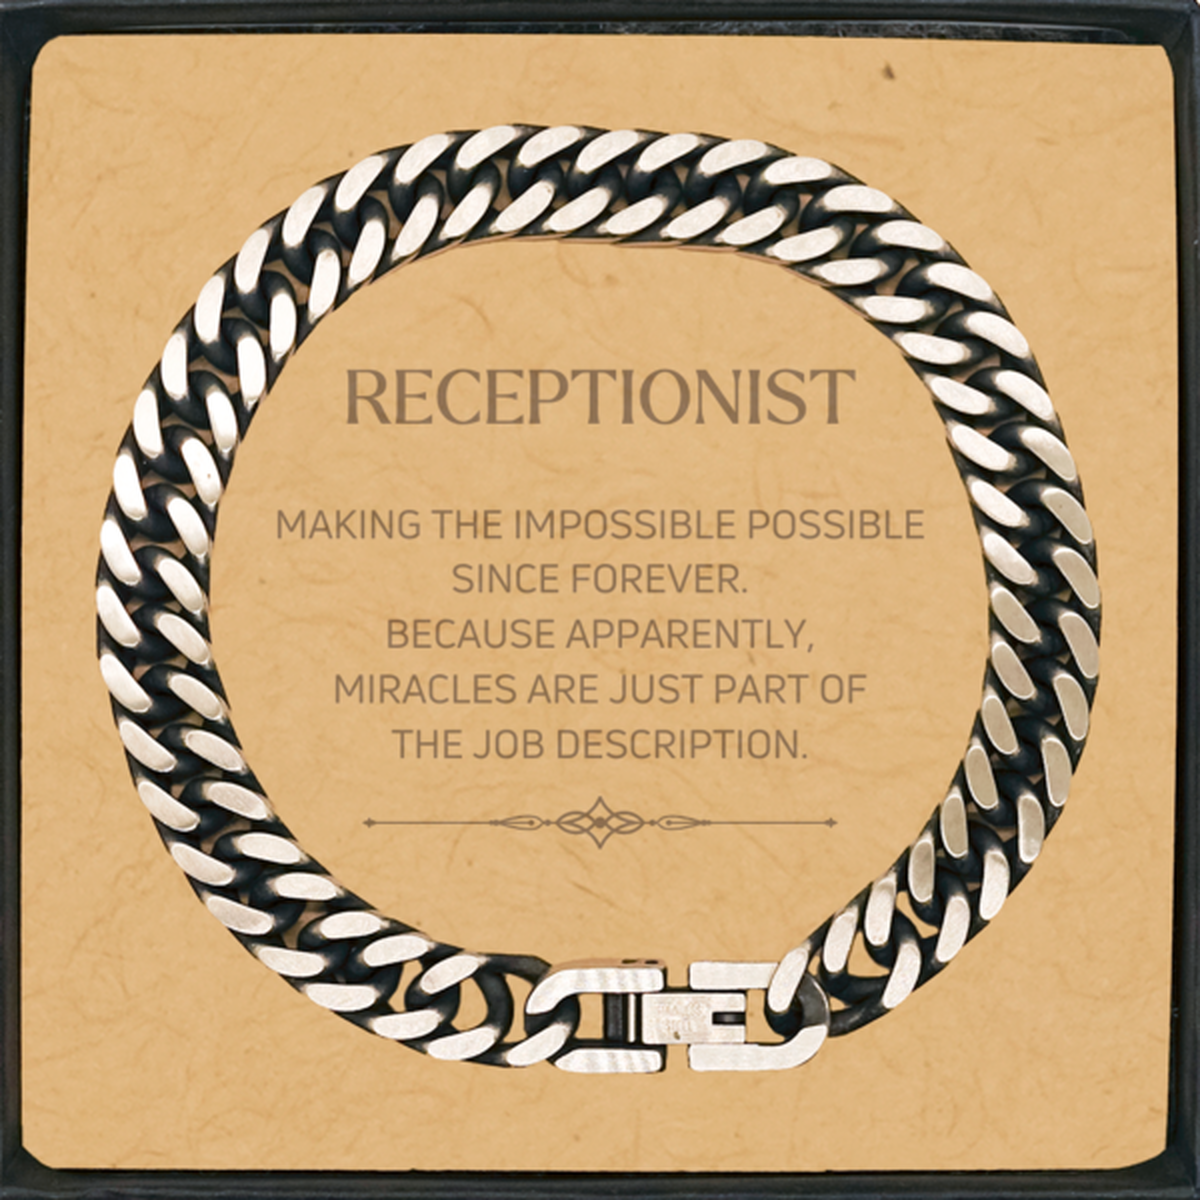 Funny Receptionist Gifts, Miracles are just part of the job description, Inspirational Birthday Cuban Link Chain Bracelet For Receptionist, Men, Women, Coworkers, Friends, Boss